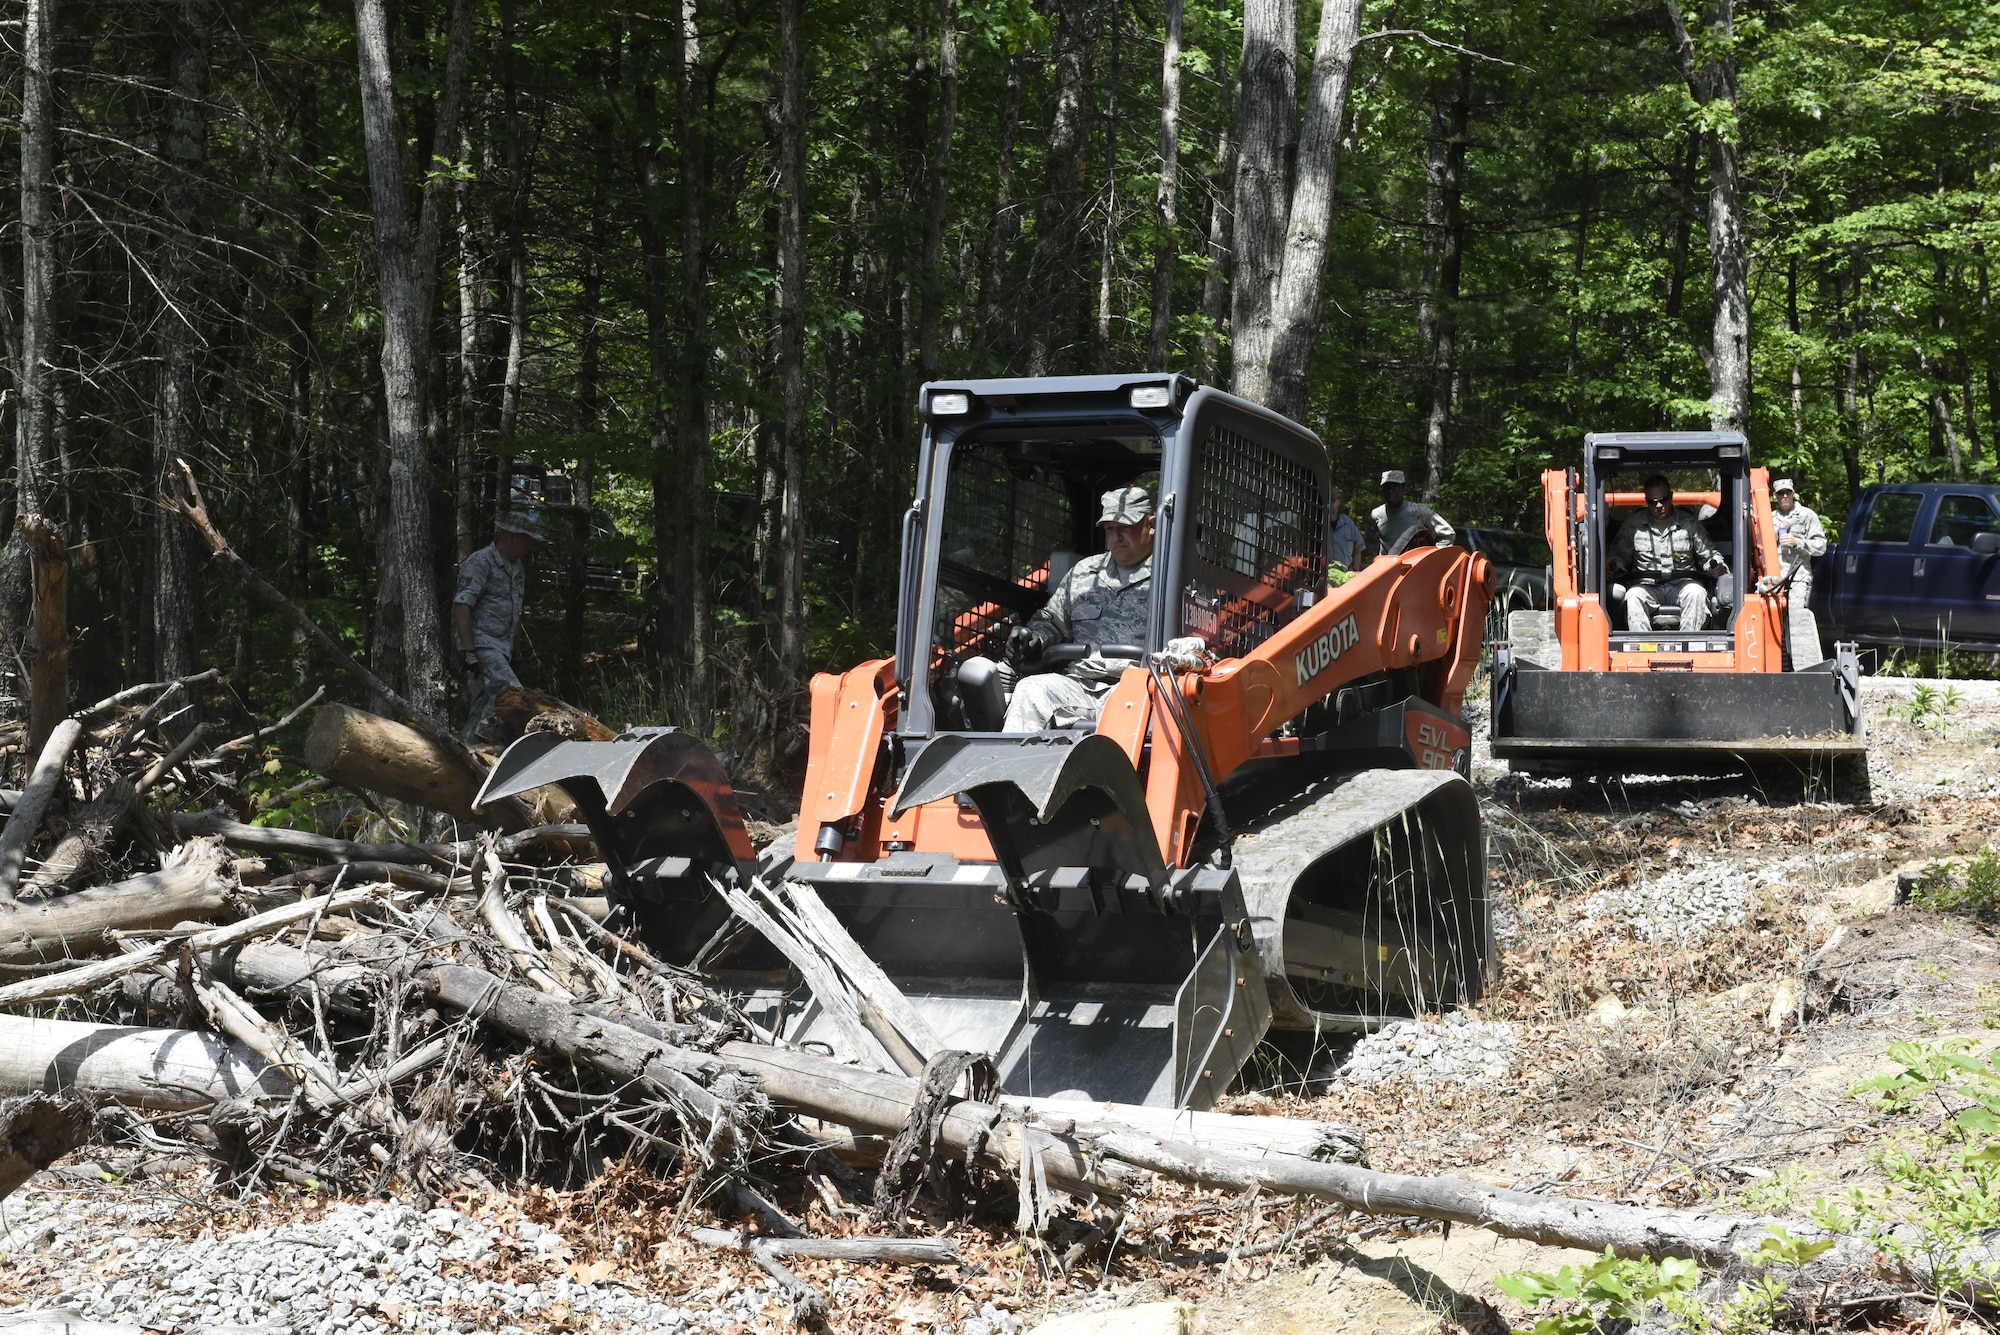 U.S. Air Force Staff Sgt. Adam Palmer (left) and Staff Sgt. Alan L. Zimmerman (right) heavy equipment operators with the 145th Airlift Wing Civil Engineer Squadron operate skid loaders to clear debris from a simulated F-15 crash site during Vigilant Catamount, an interagency domestic exercise between local, state, and military personnel in North Carolina, at Dupont State Forest, Hendersonville North Carolina, June 8, 2017. The skid loader is a part of the debris package unit that is utilized during disasters to open blocked roadways and allow emergency response personnel to reach injured victims during a disaster.